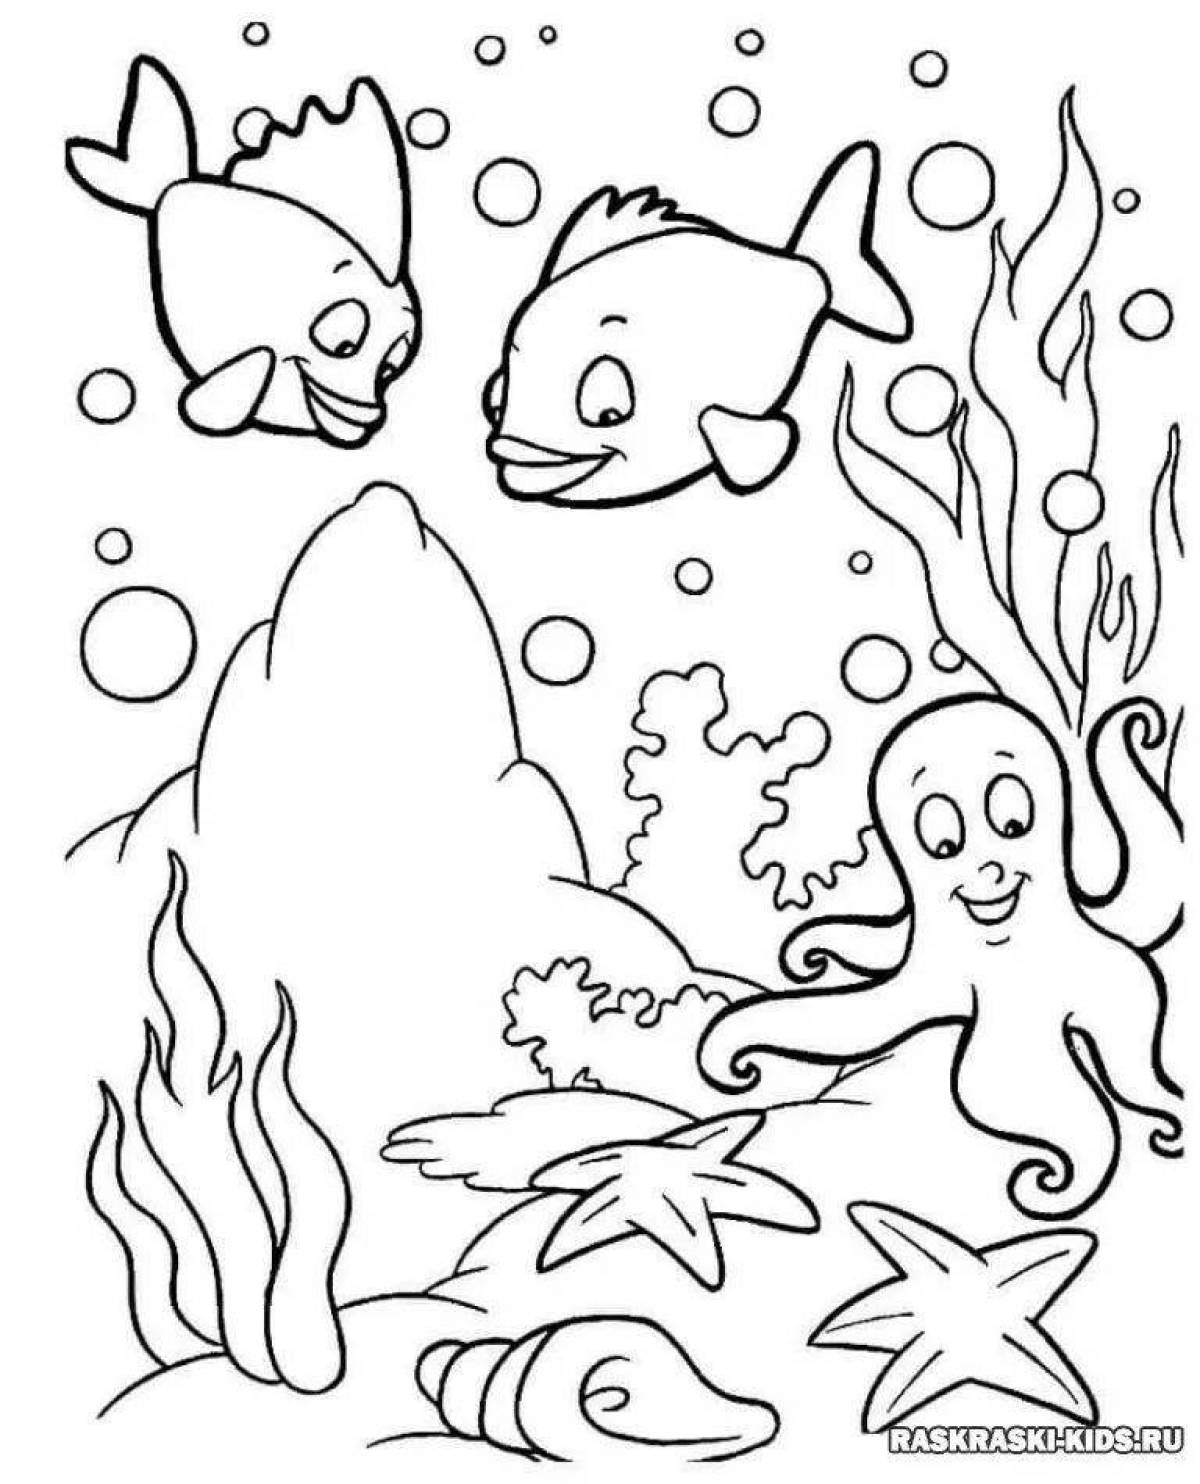 Coloring page magnificent sea world